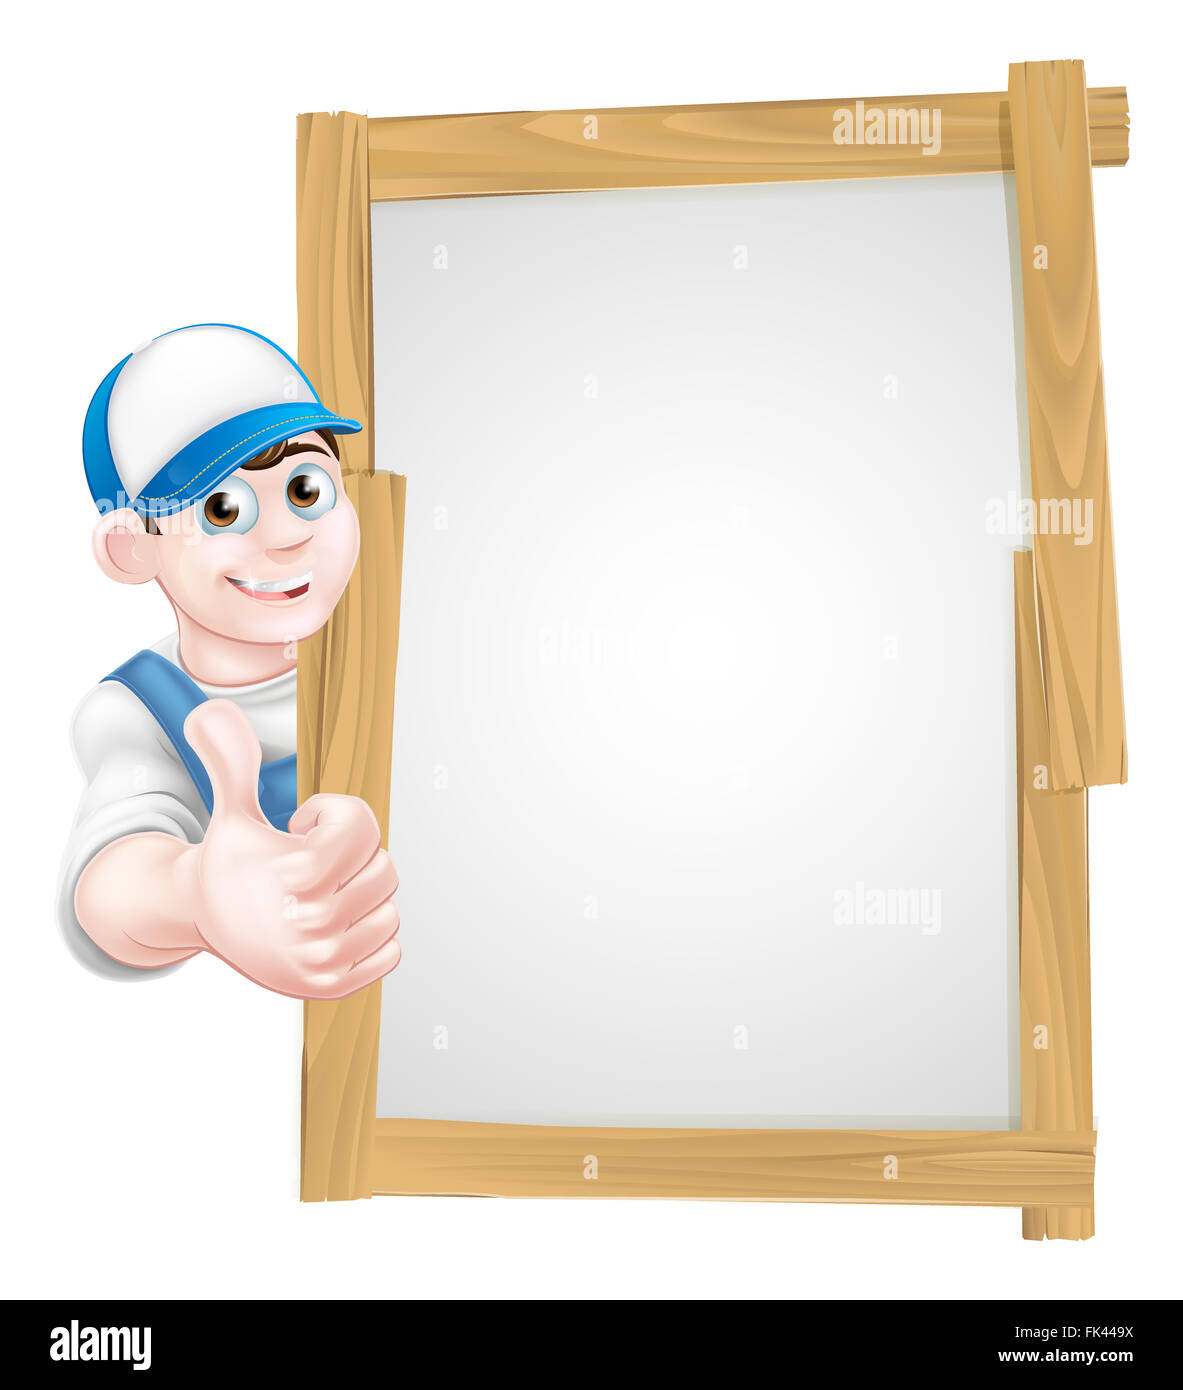 Cartoon mechanic, plumber, handyman, decorator or gardener leaning around a wooden sign board and giving a thumbs up Stock Photo